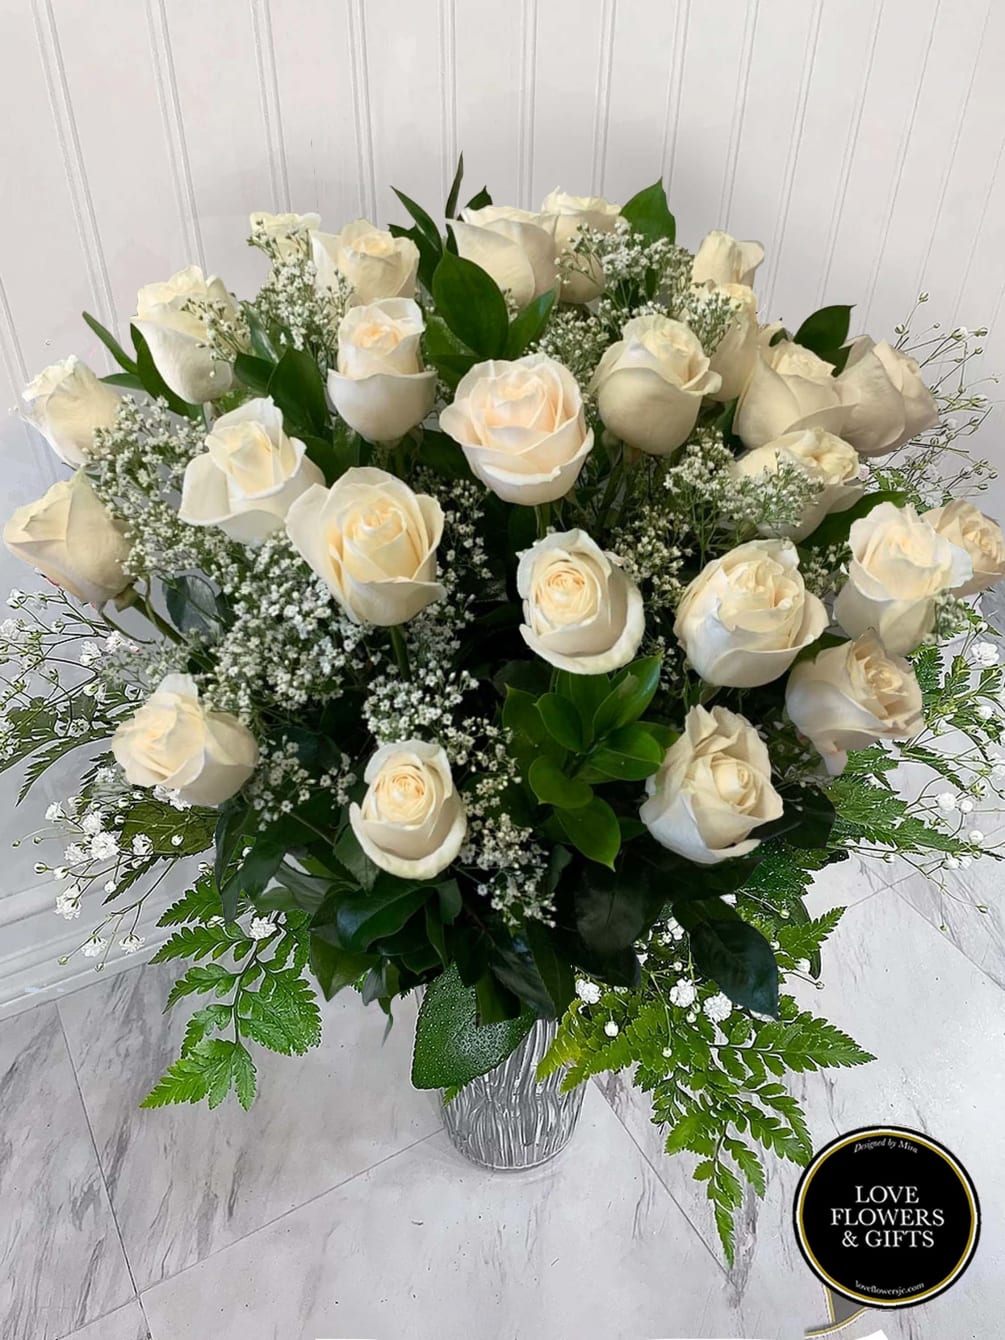 A classic arrangement of fresh white roses, filler flowers, and fresh greenery